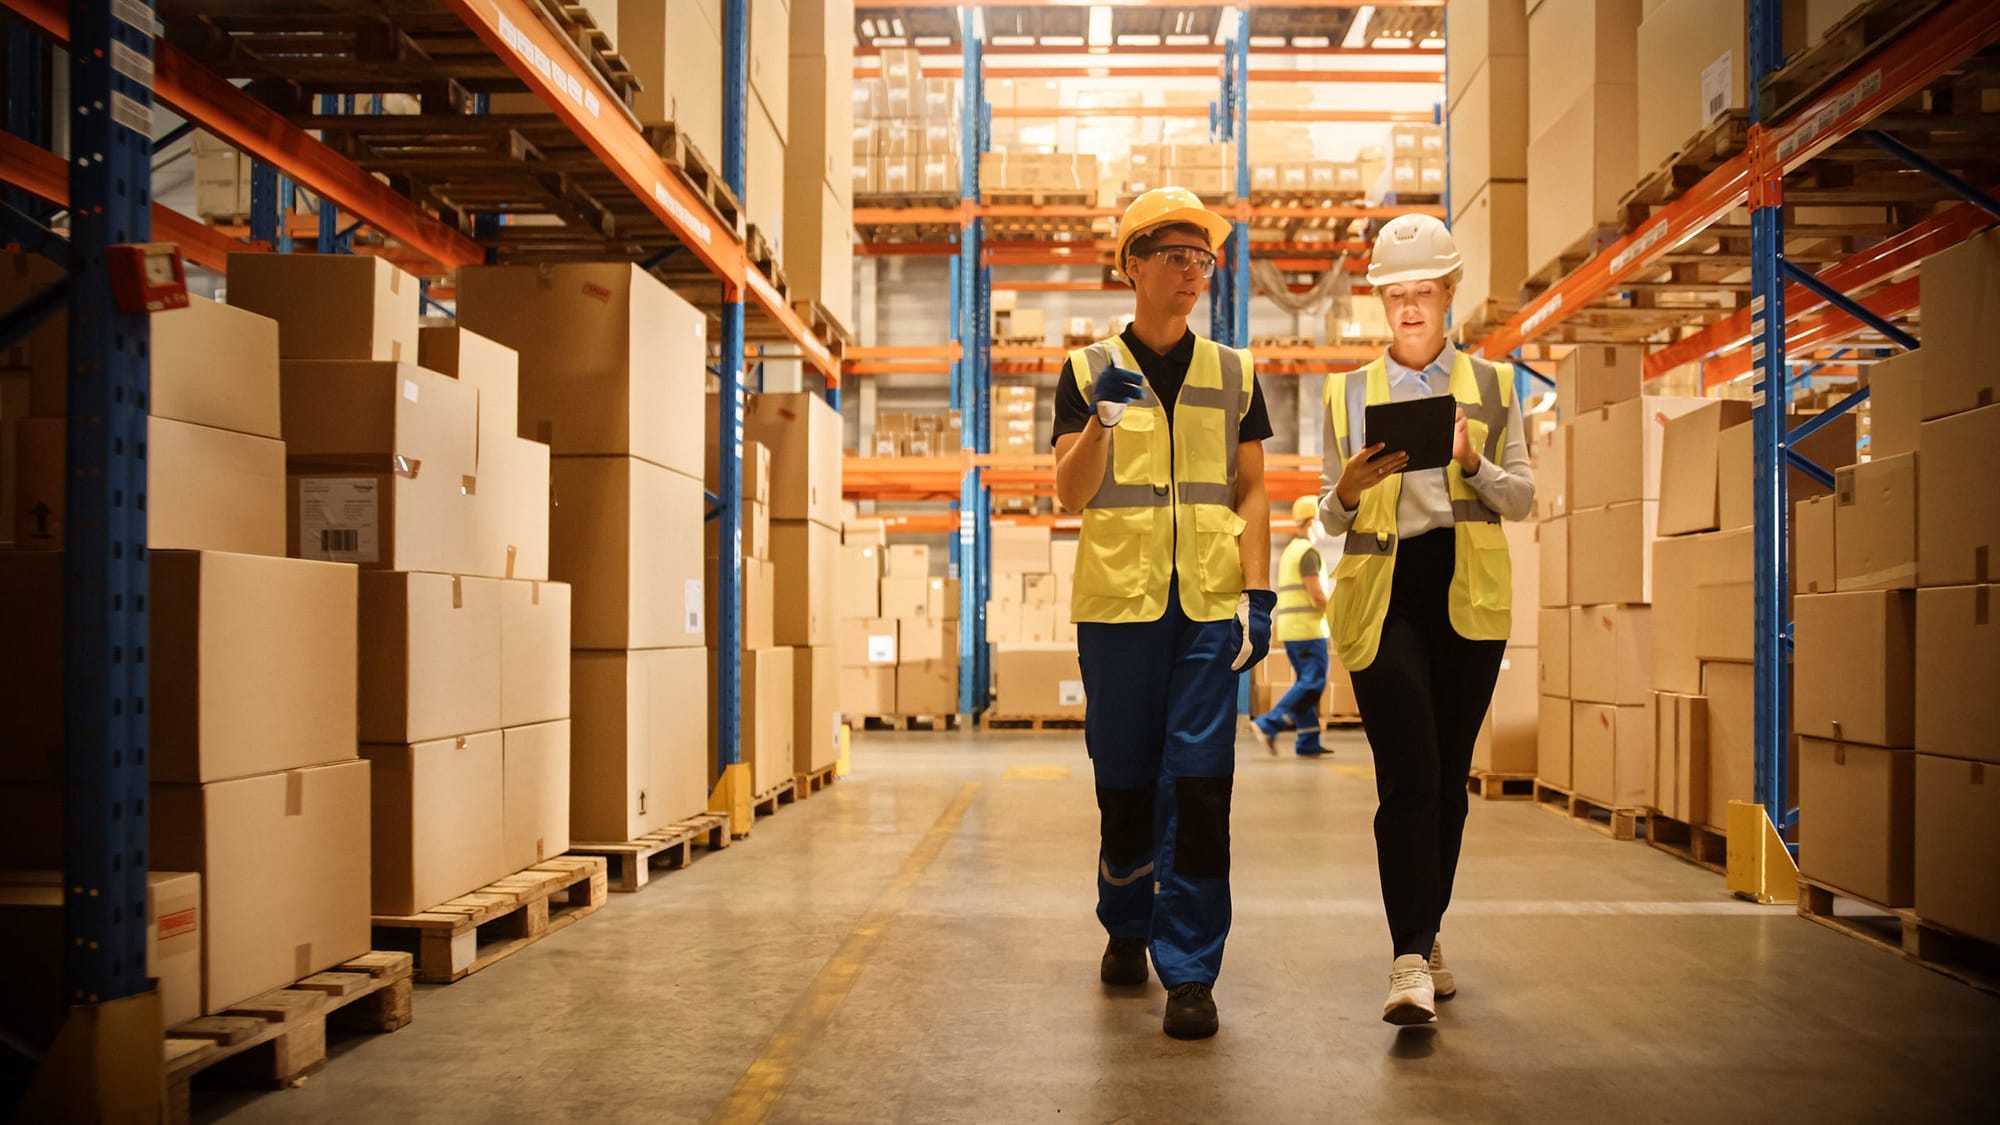 Two workers walking through large warehouse with pallets of boxes.